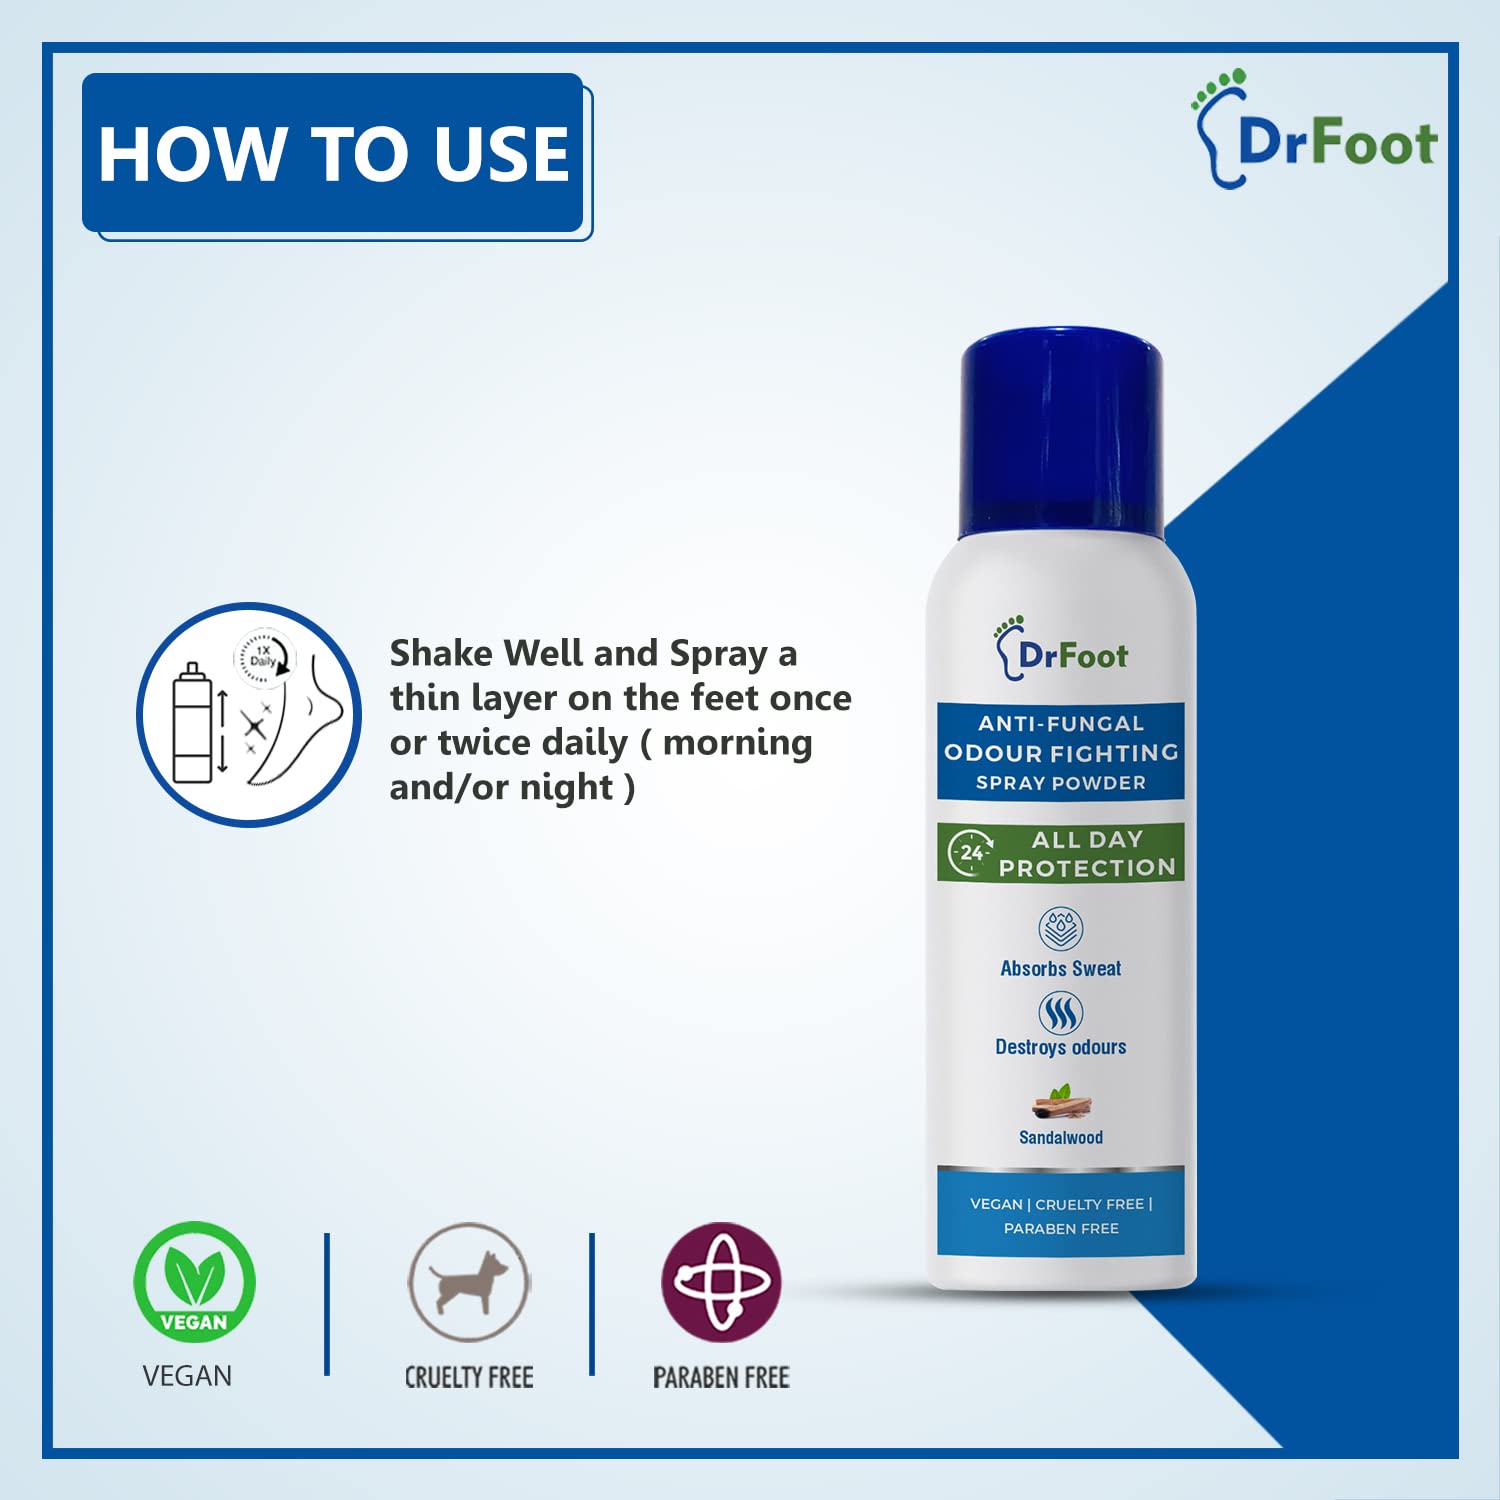 Dr Foot Anti-Fungal Odour Fighting Spray Powder with Neem Powder, Menthol Oil & Sandalwood | Ultimate Odour Neutralizer| Removes Bad Smell & Keep your foot Fresh and Dry – 130ml / 80gm (Pack of 3)